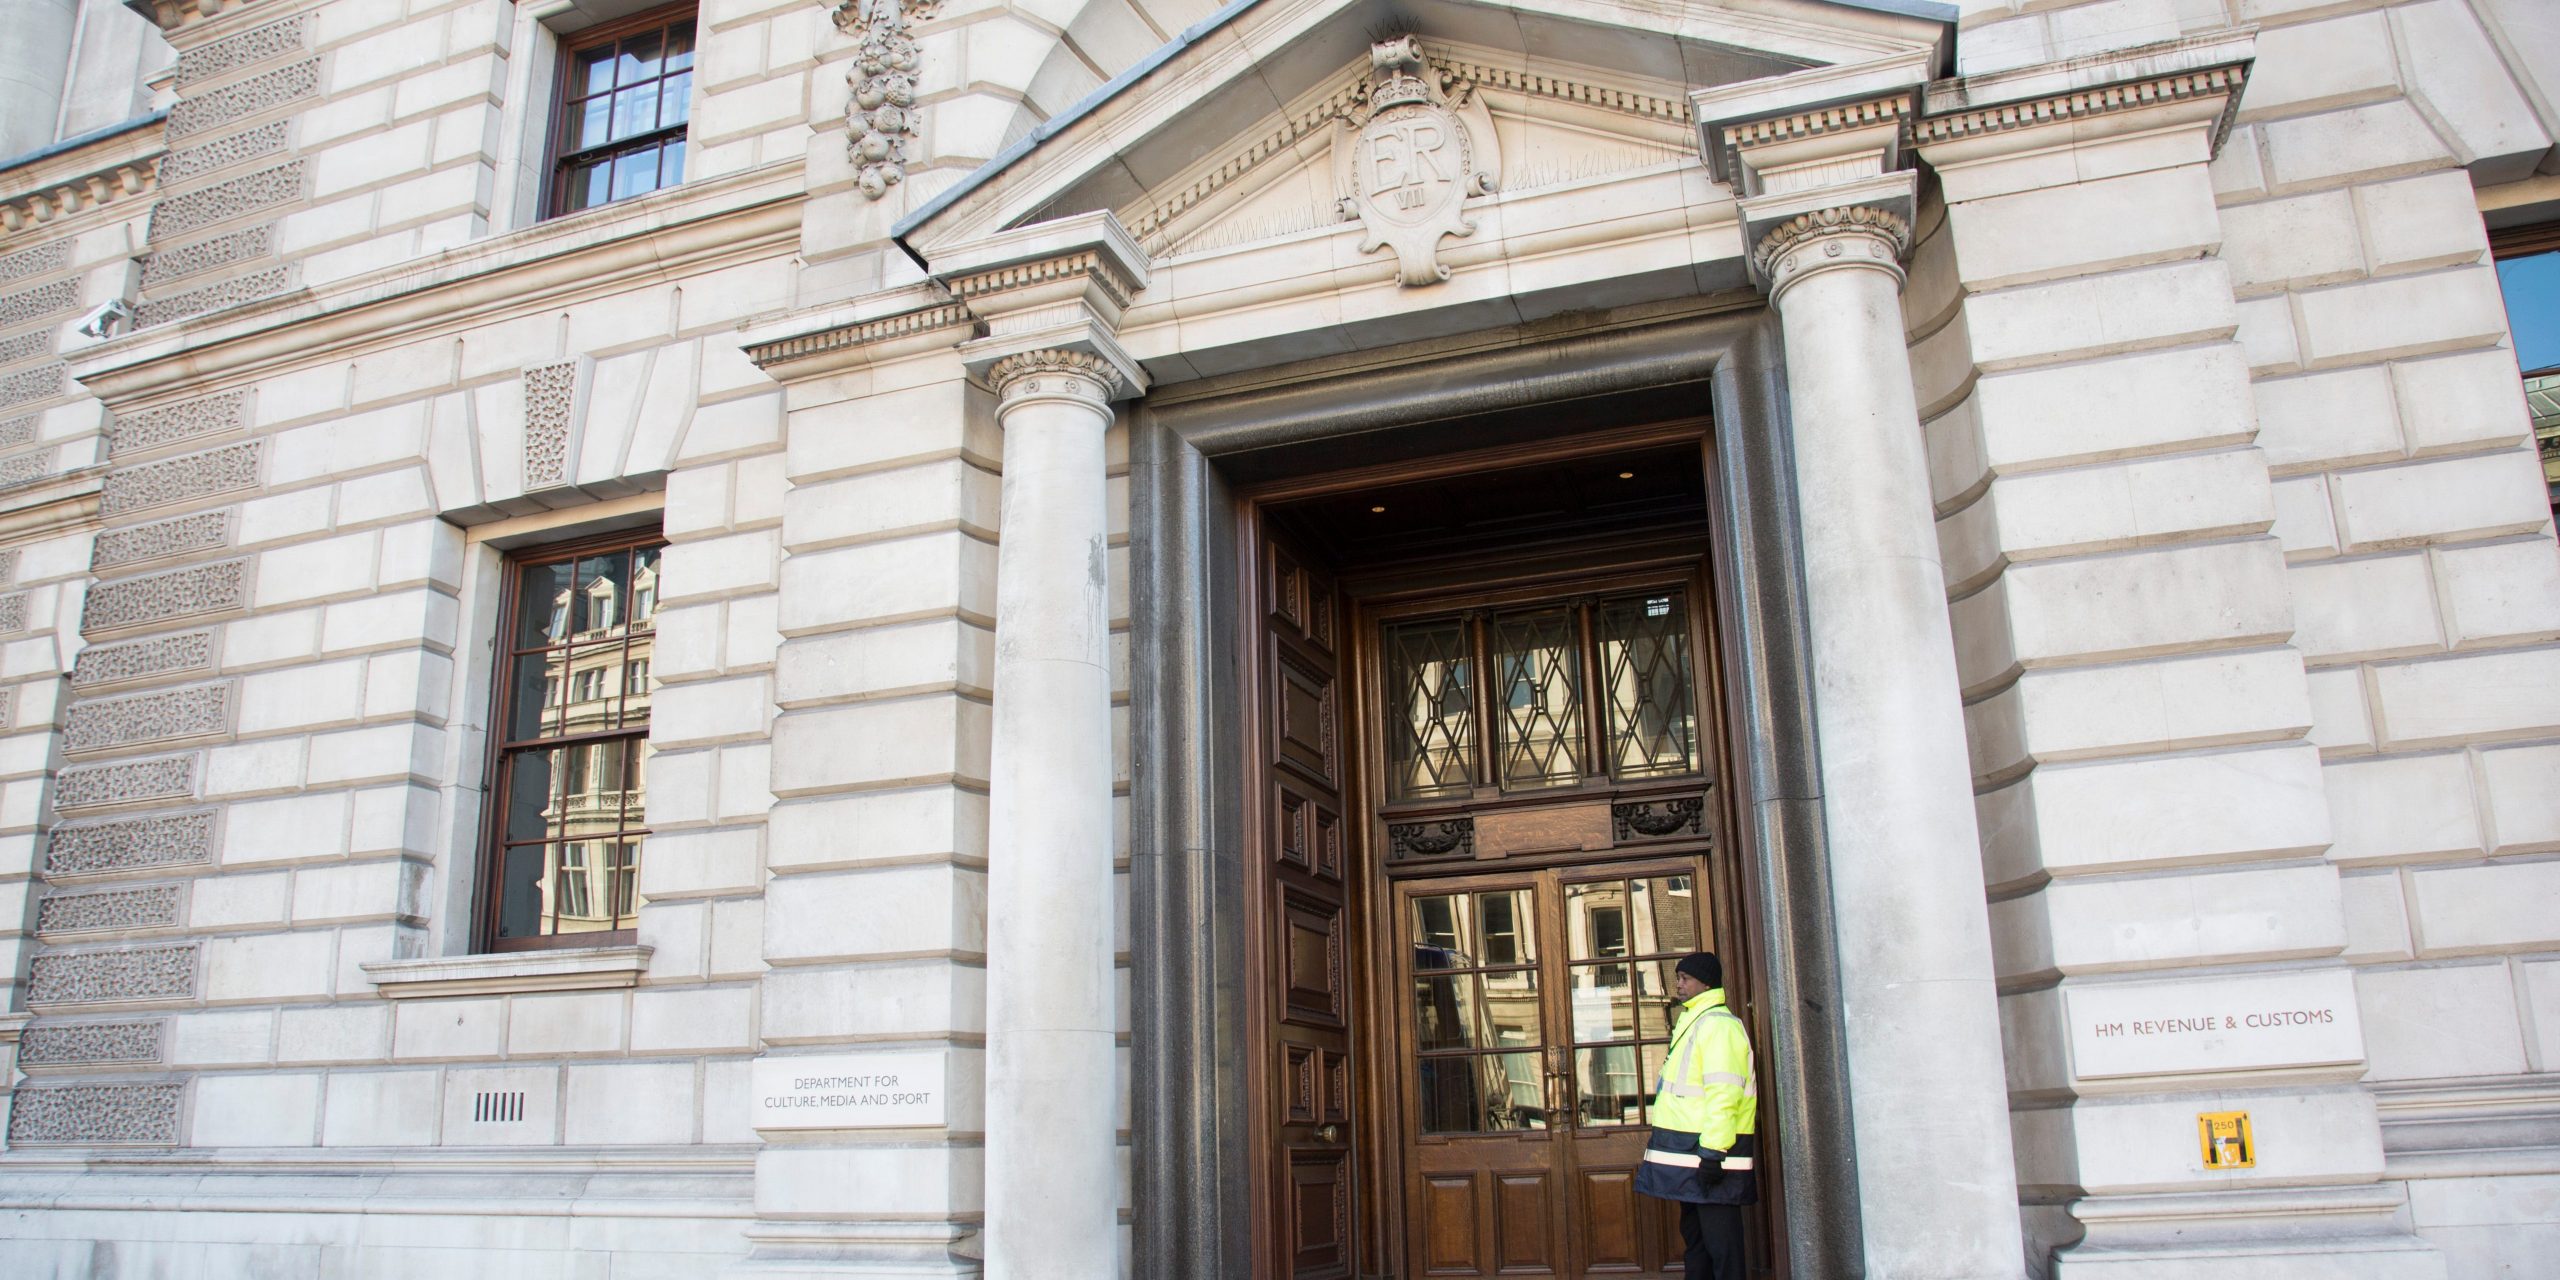 A guard stands at the HM Revenue and Customs building in London.